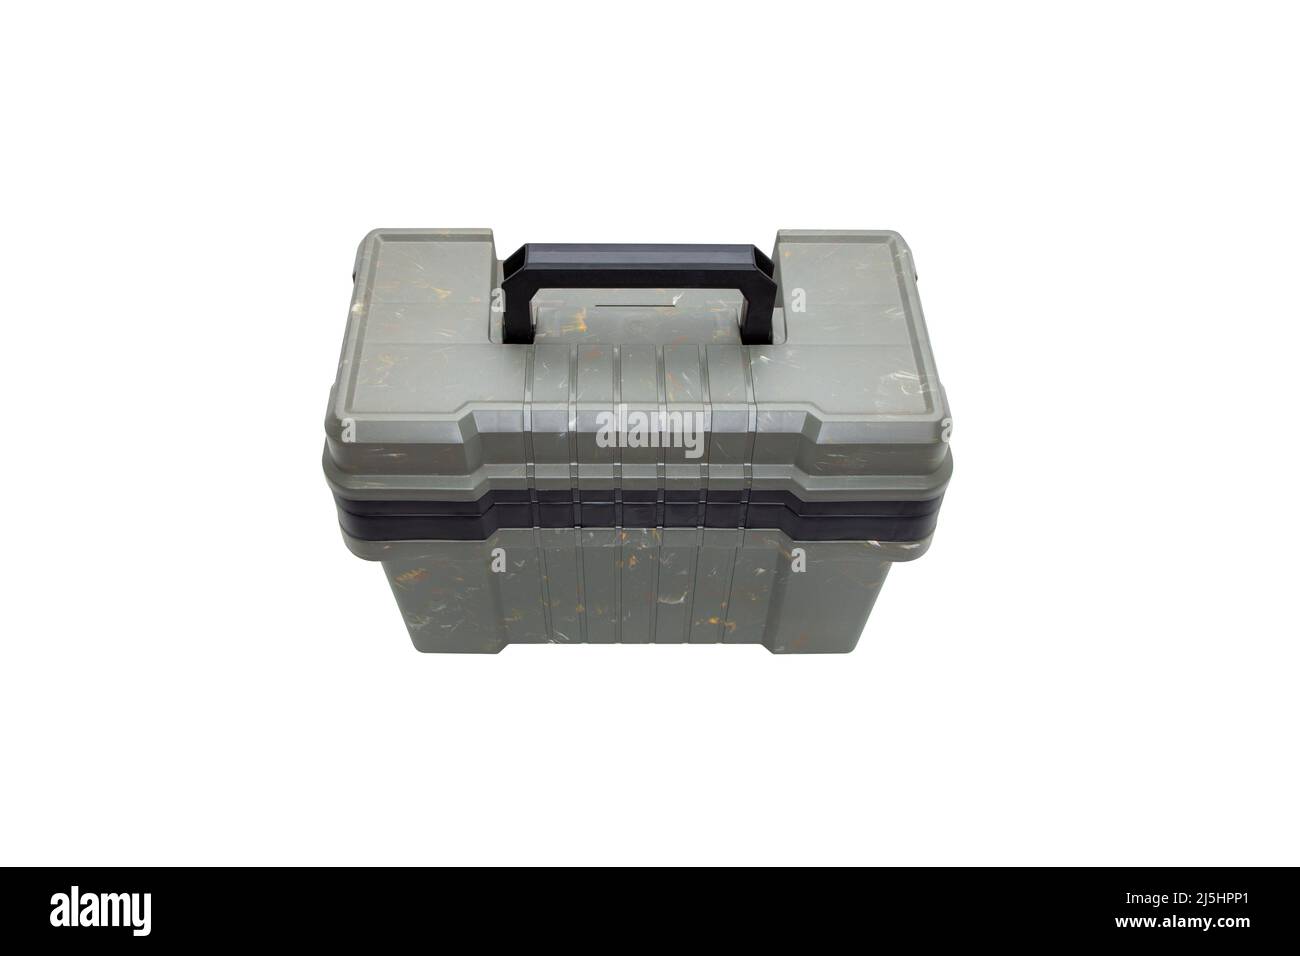 Portable plastic container with opening lid and additional compartments. Fishing or hunting box. Isolate on a white background. Stock Photo